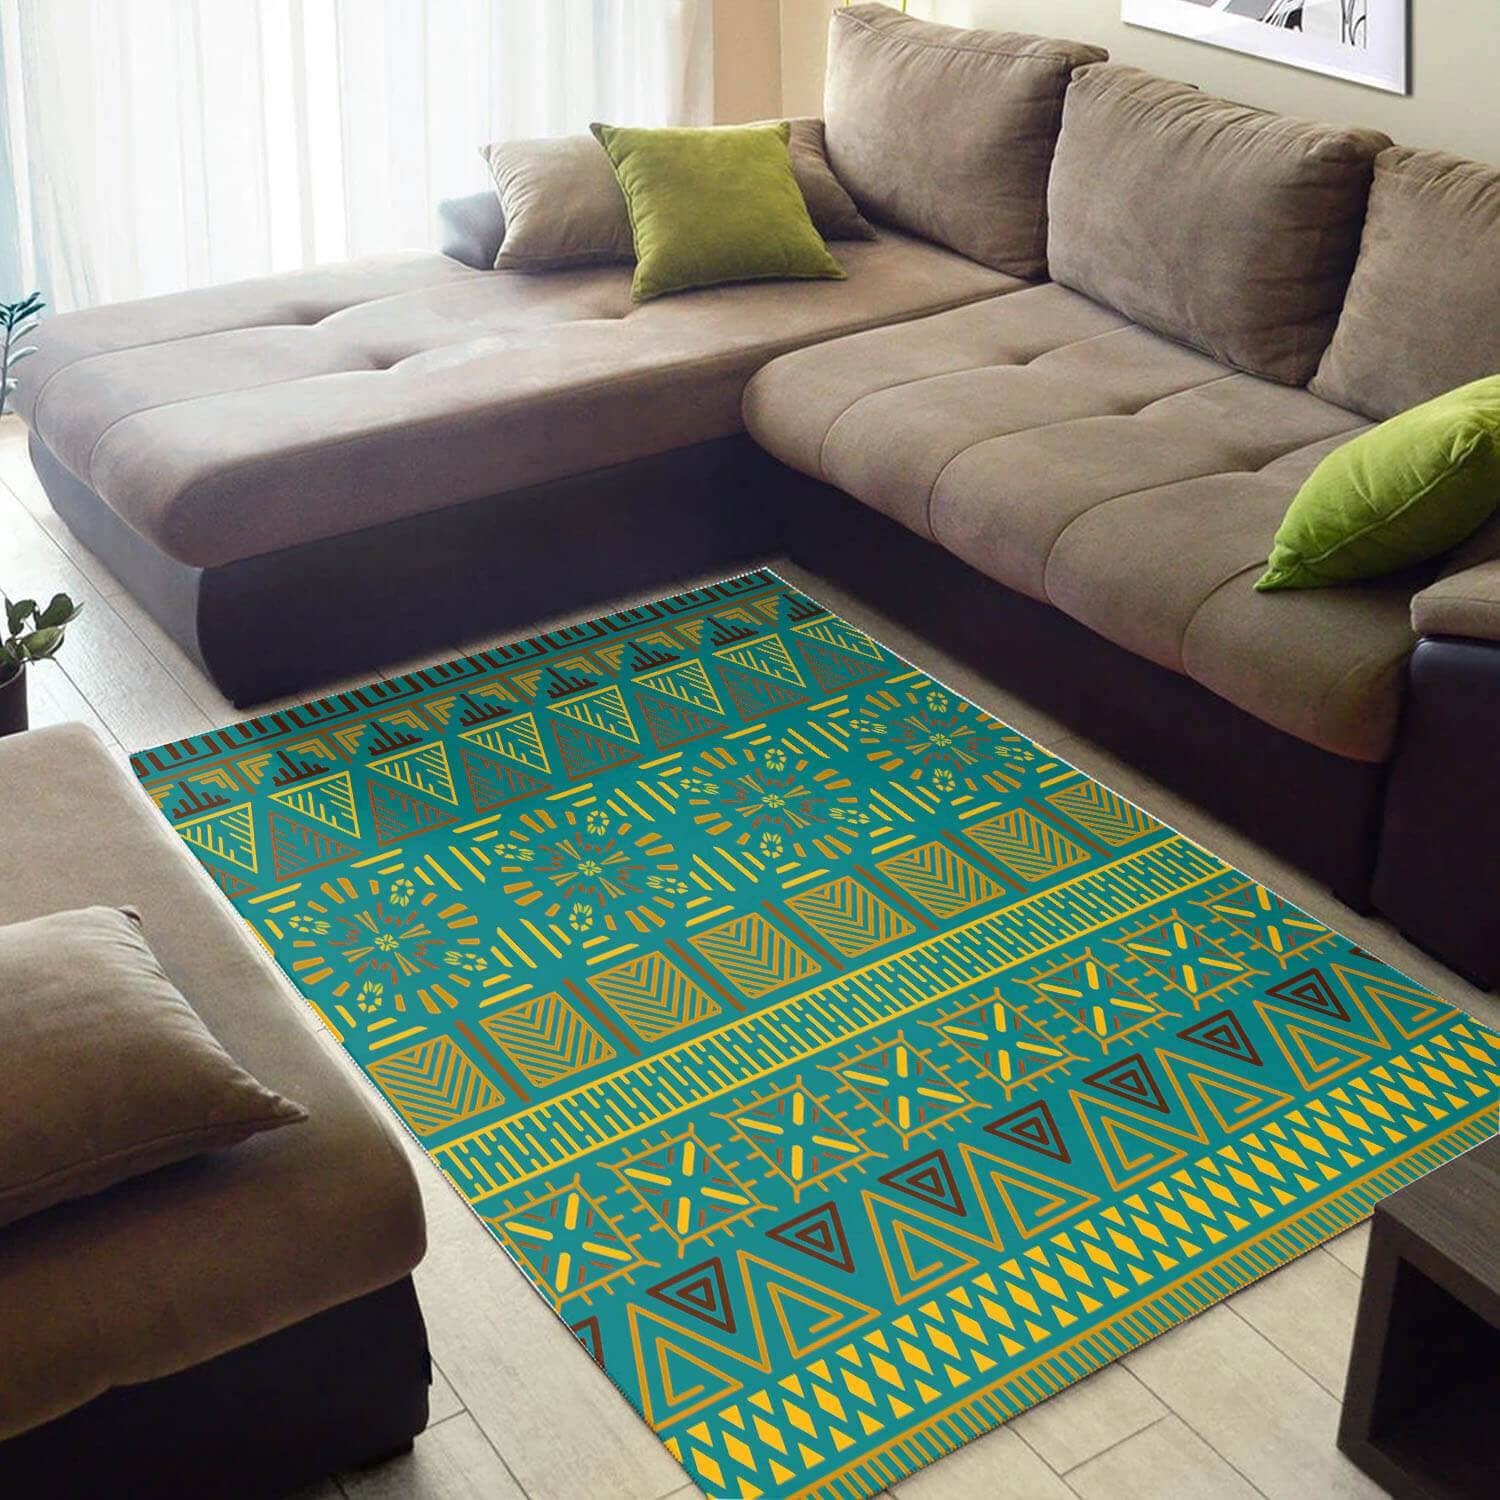 Cool African Style Unique Natural Hair Afrocentric Pattern Art Themed Carpet Inspired Living Room Rug